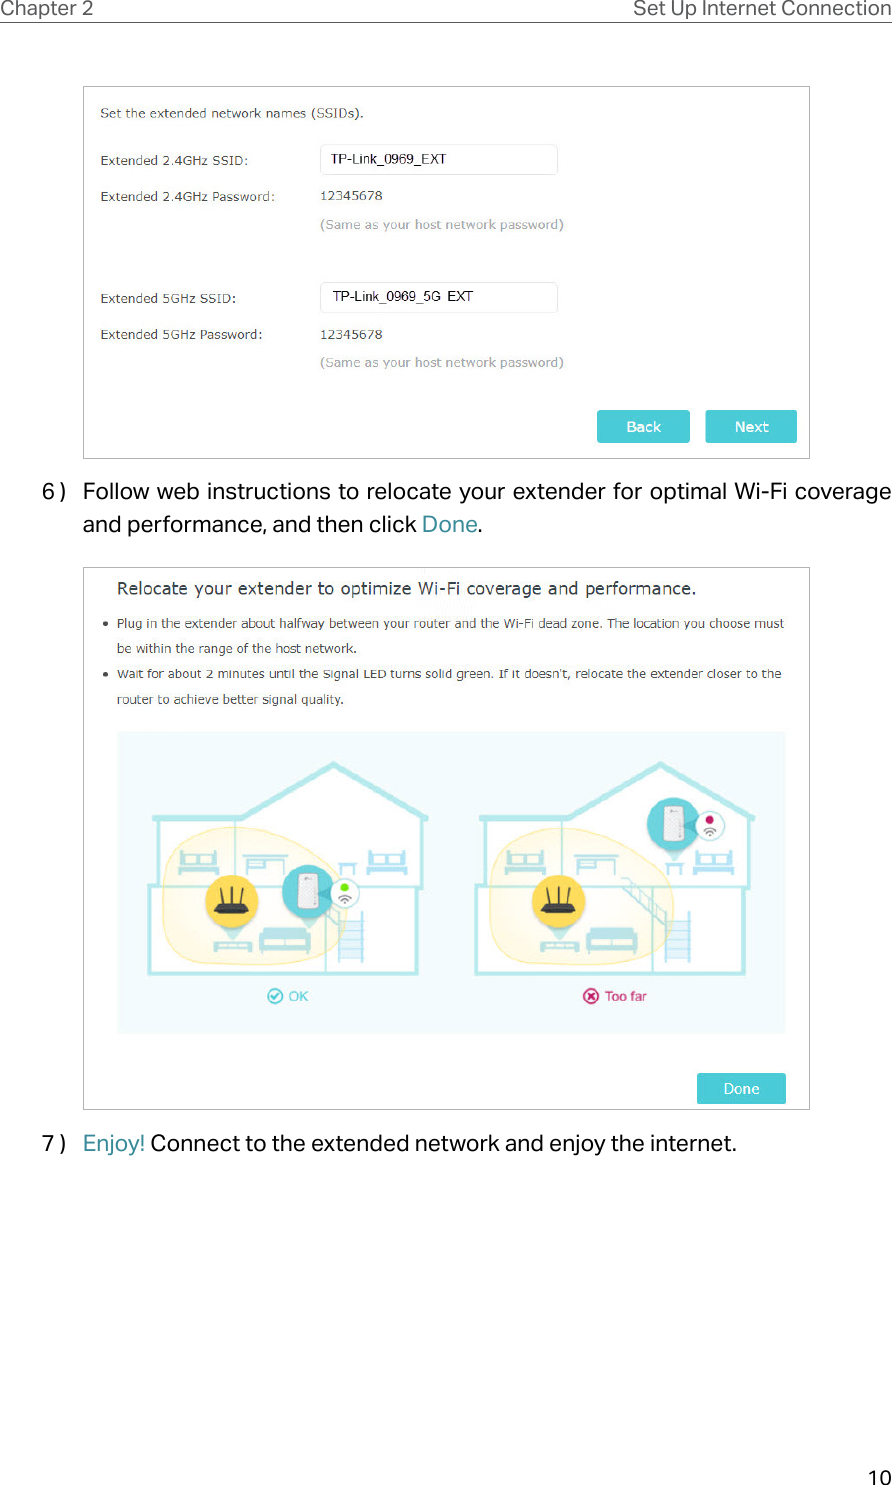 10Chapter 2 Set Up Internet Connection6 )  Follow web instructions to relocate your extender for optimal Wi-Fi coverage and performance, and then click Done.7 )  Enjoy! Connect to the extended network and enjoy the internet.